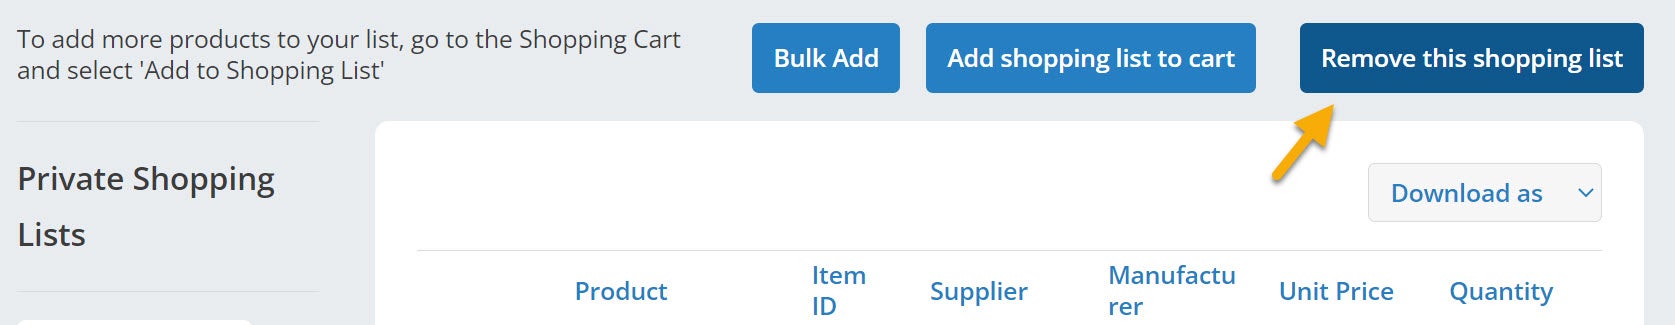 If you need to delete the selected Shopping List, click the Remove This Shopping List button.